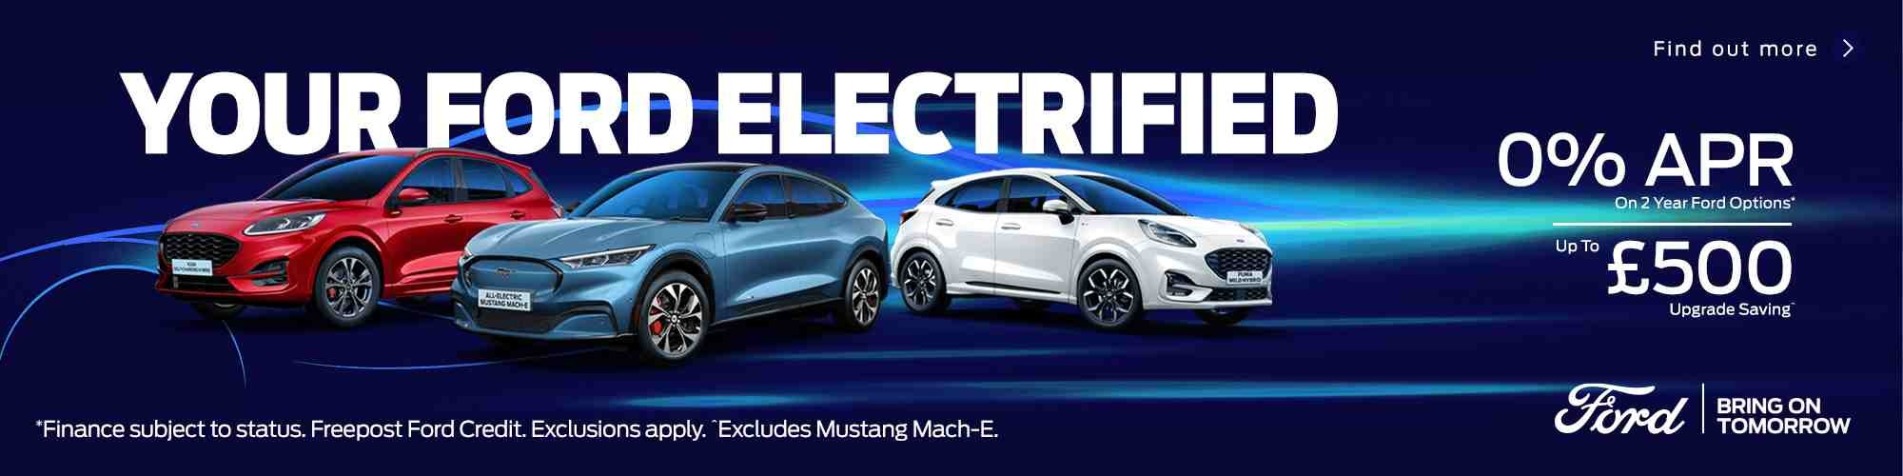 Q4 Your Ford Electrified Campaign Homepage Banners